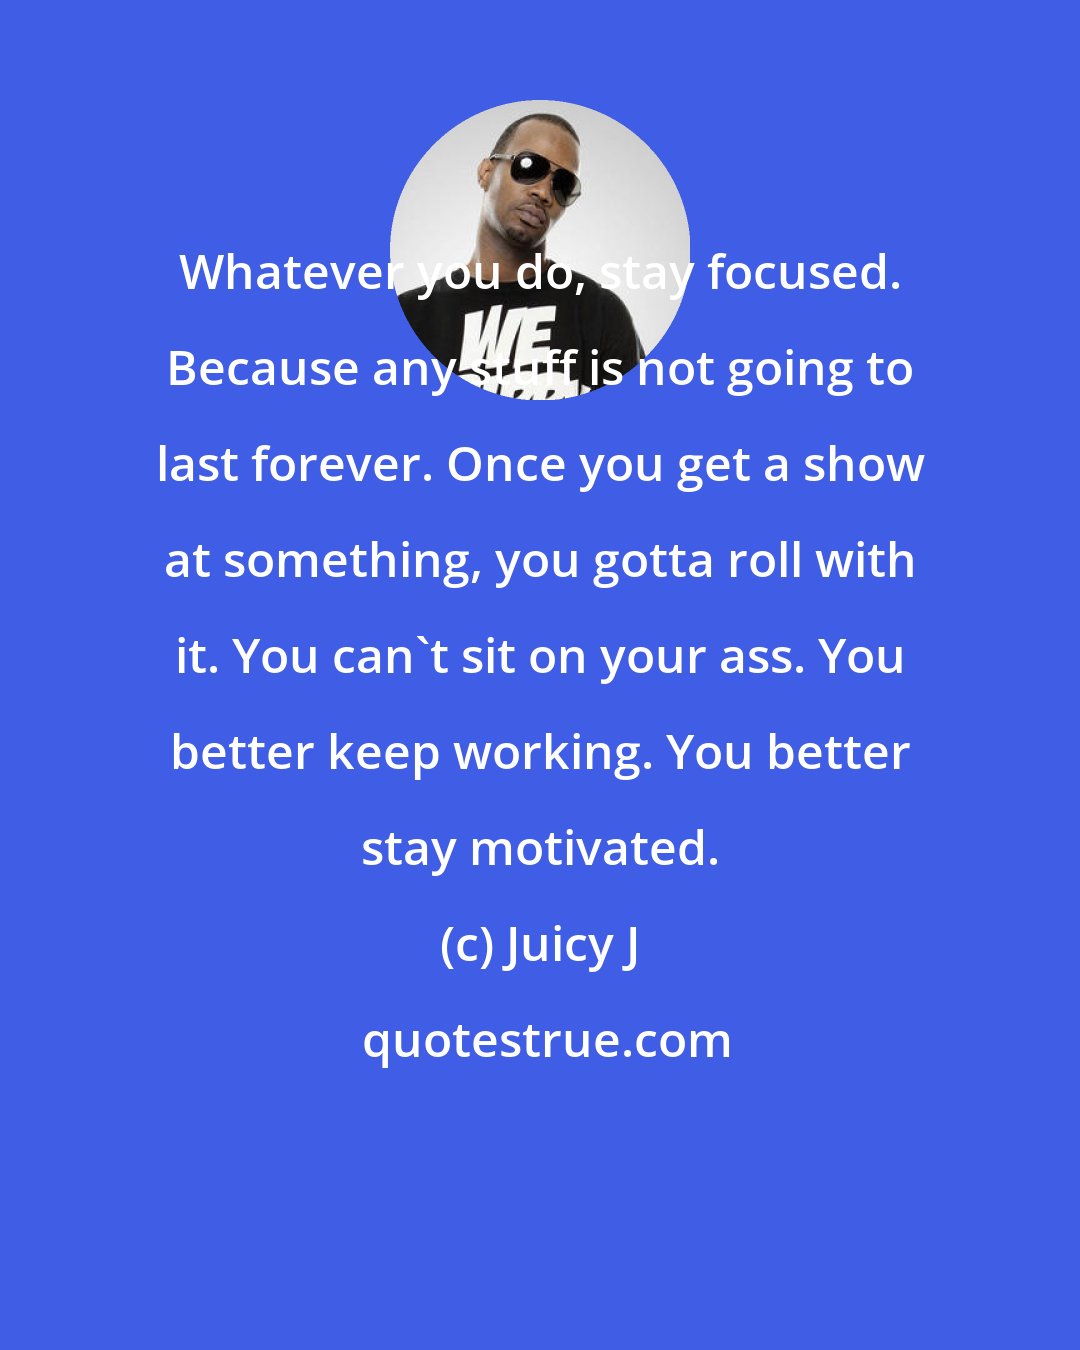 Juicy J: Whatever you do, stay focused. Because any stuff is not going to last forever. Once you get a show at something, you gotta roll with it. You can't sit on your ass. You better keep working. You better stay motivated.